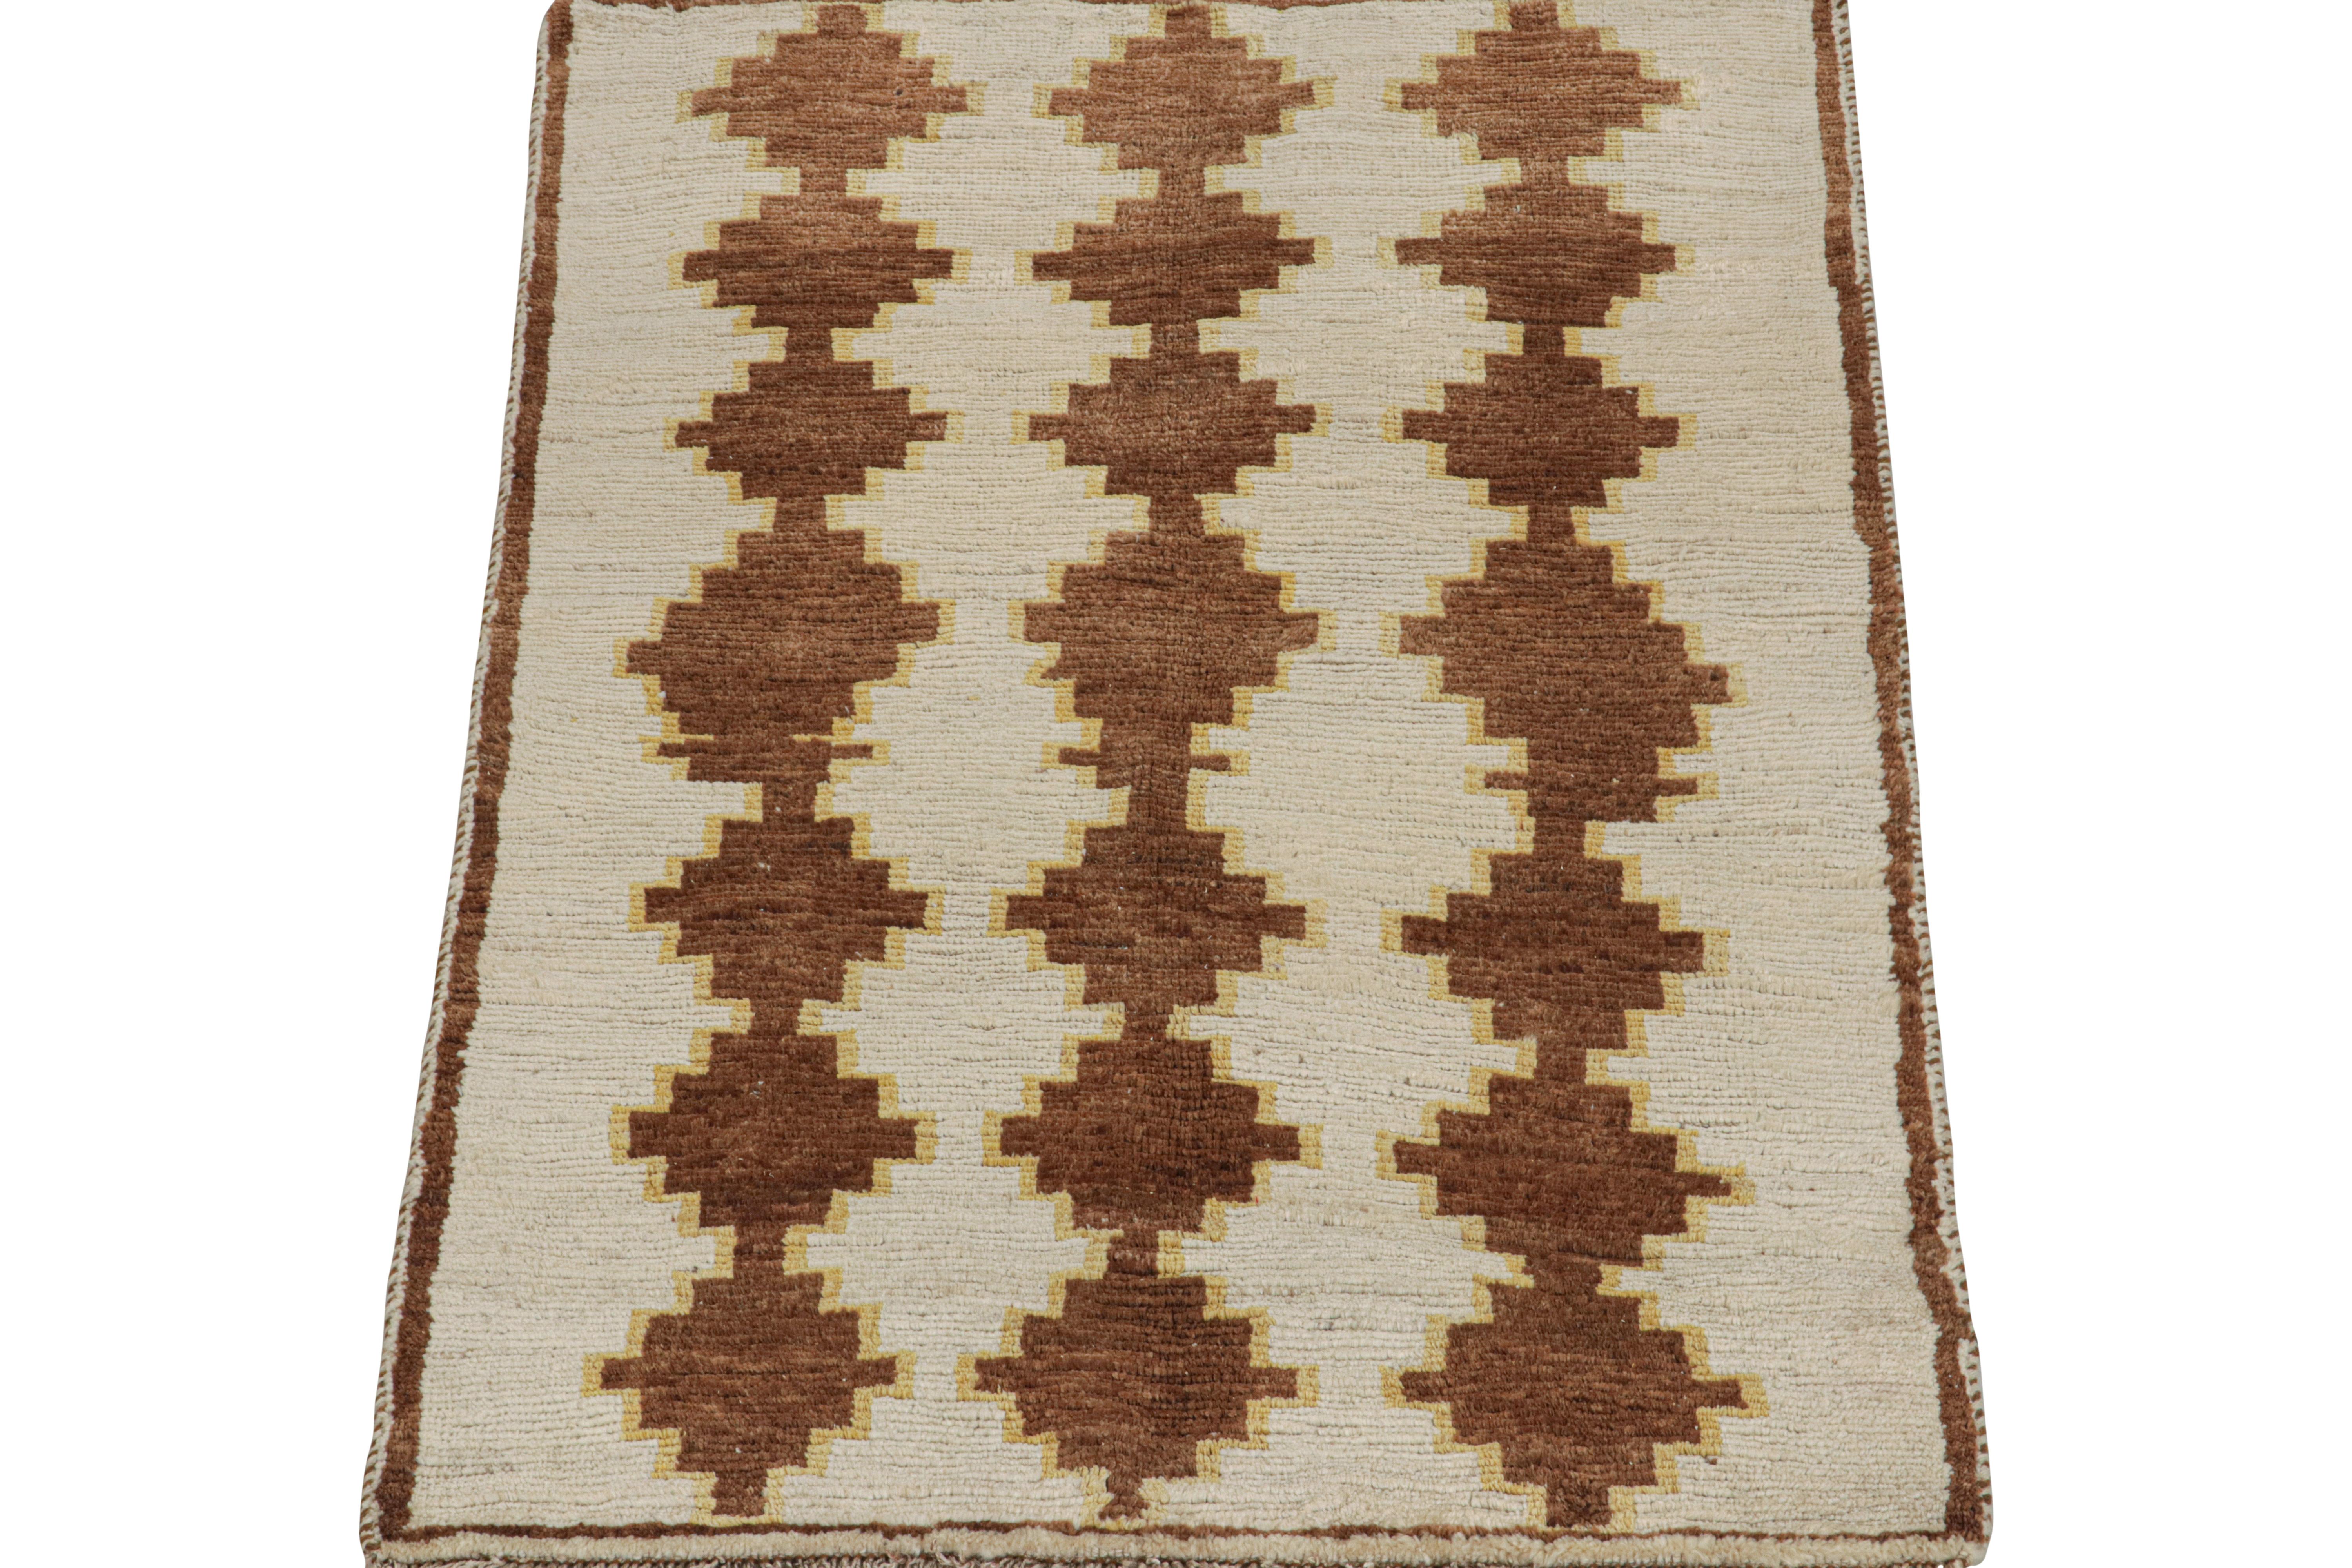 This vintage 4x6 Persian rug is a Gabbeh rug that originates from the Qashqai tribe—hand-knotted in wool circa 1950-1960.

Its geometric pattern enjoys a play of beige and brown geometric patterns with fine yellow accents. 

Connoisseurs will